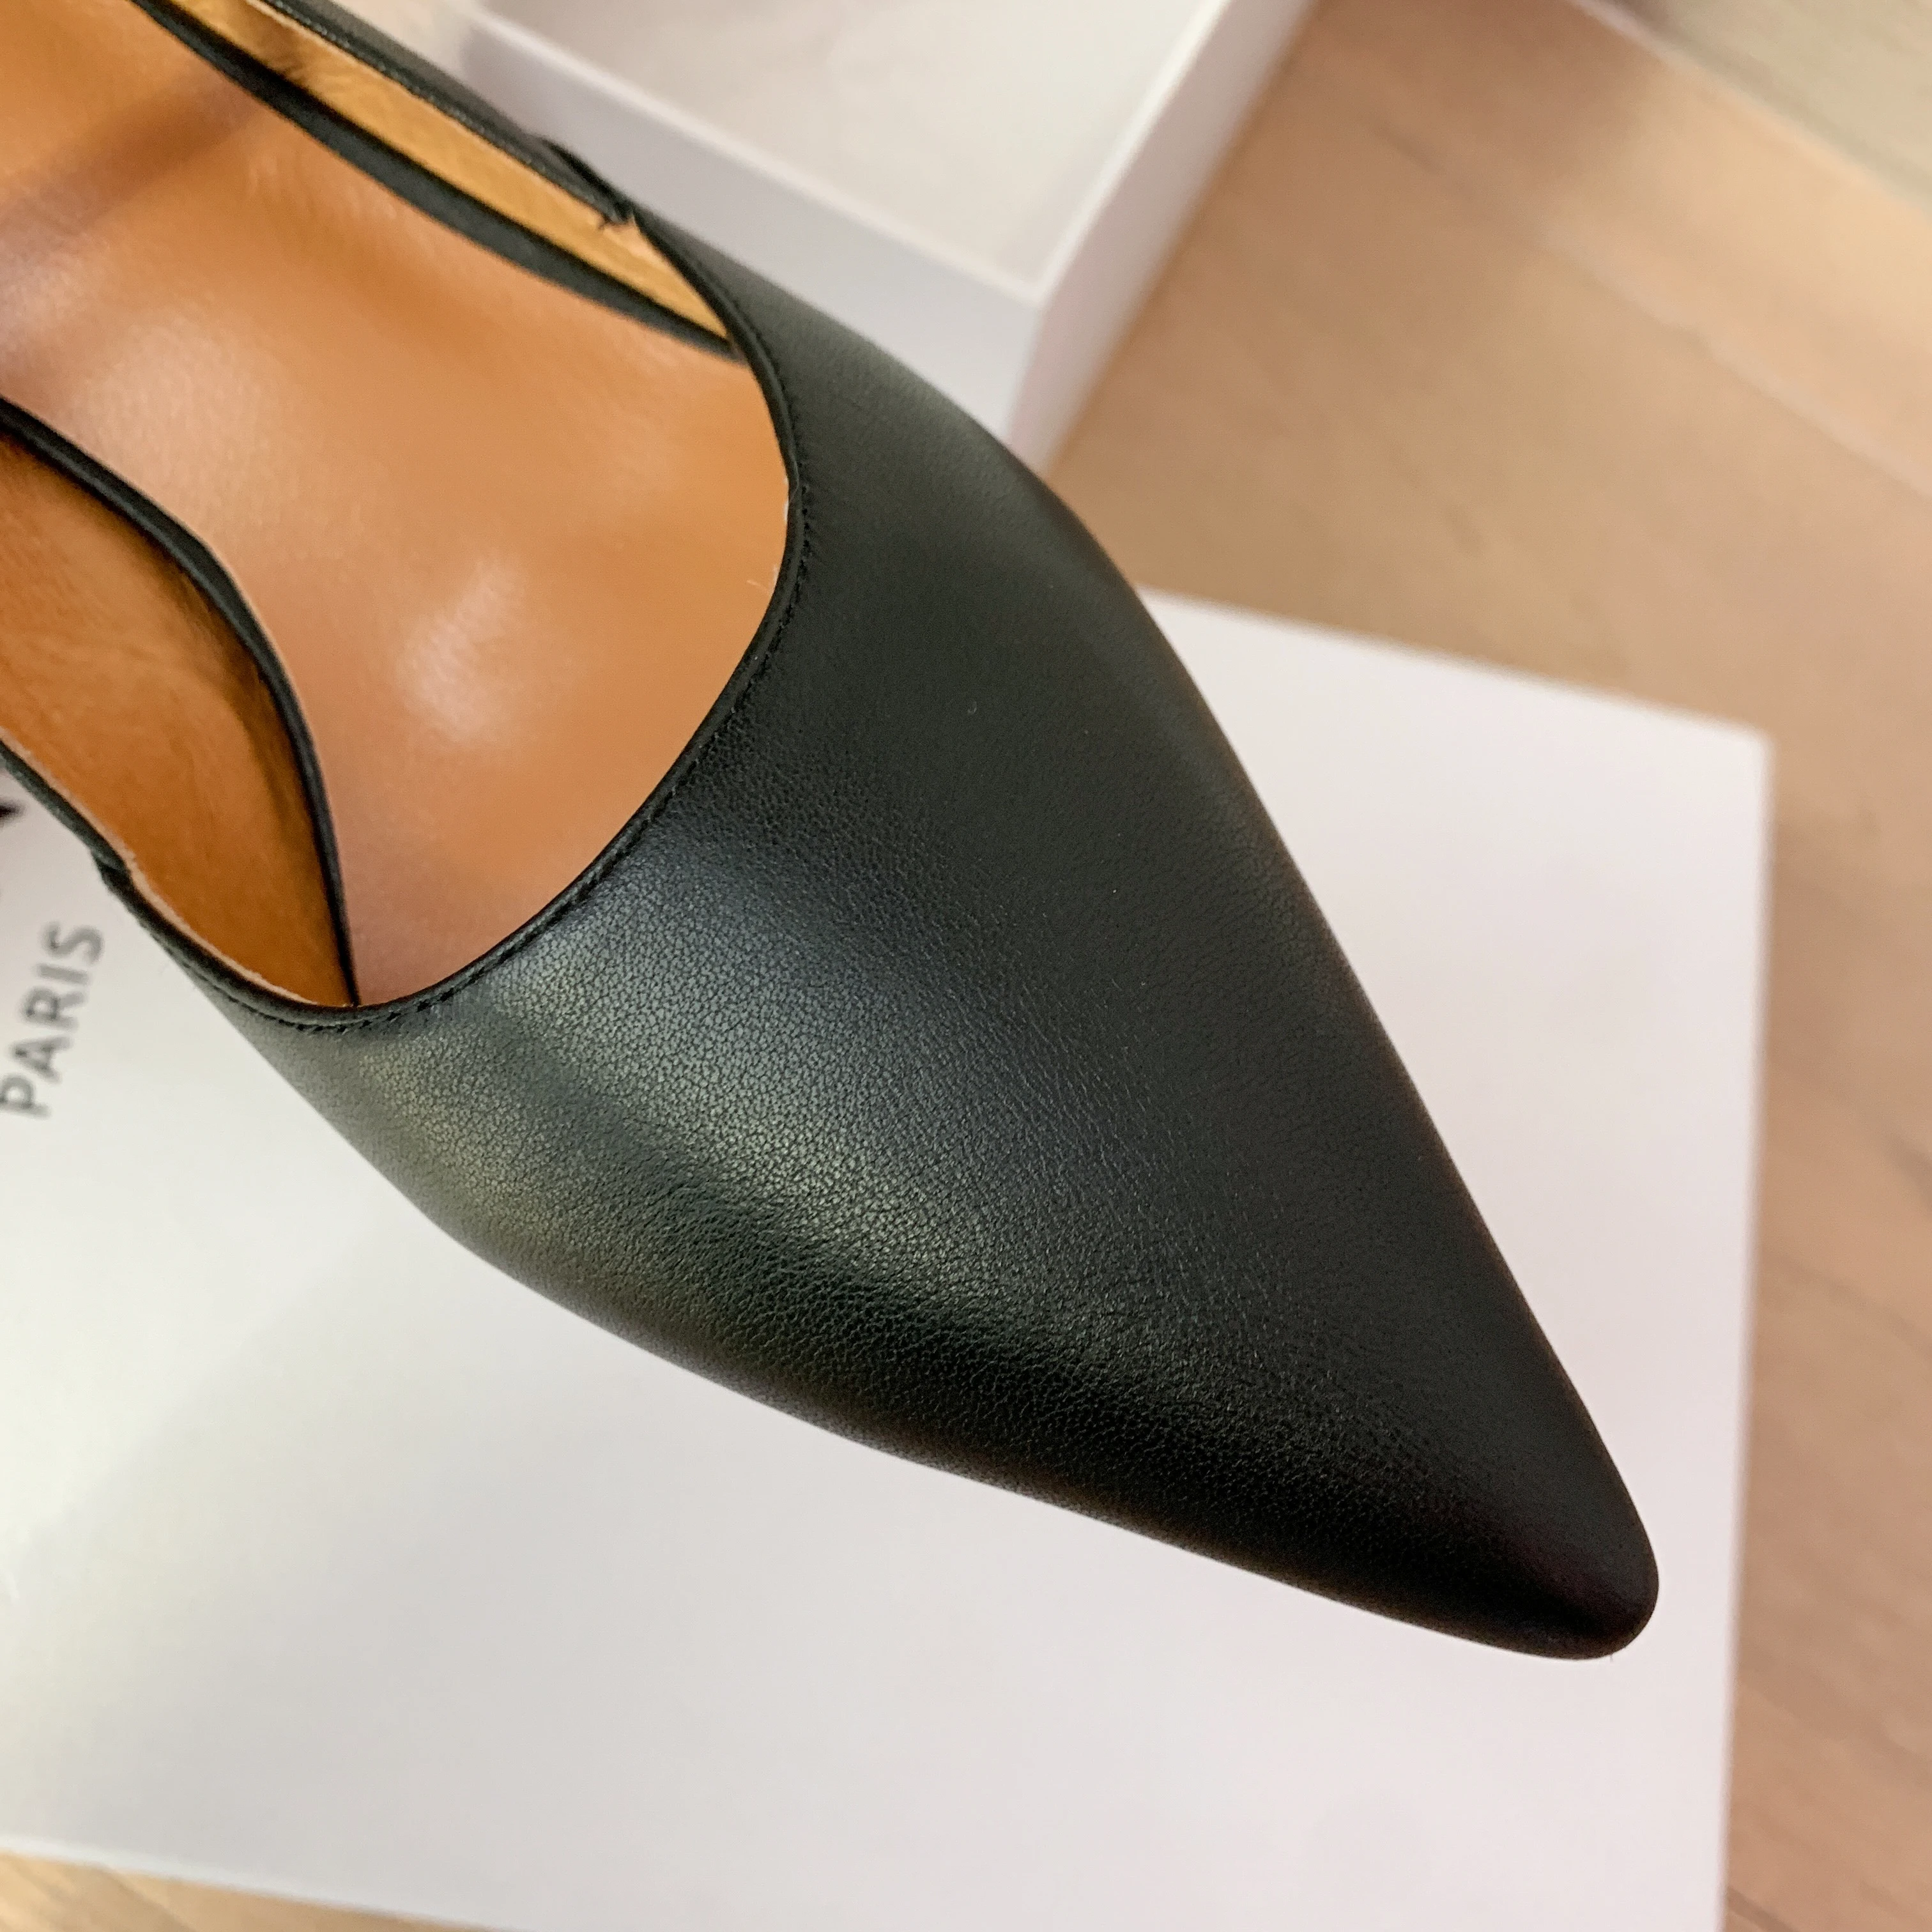 

Kanseet New Fashion Female Shoes High Heels Pumps Spring Autumn Rivet Decoration Genuine Leather Pointed Toe Thin Heels Shoes